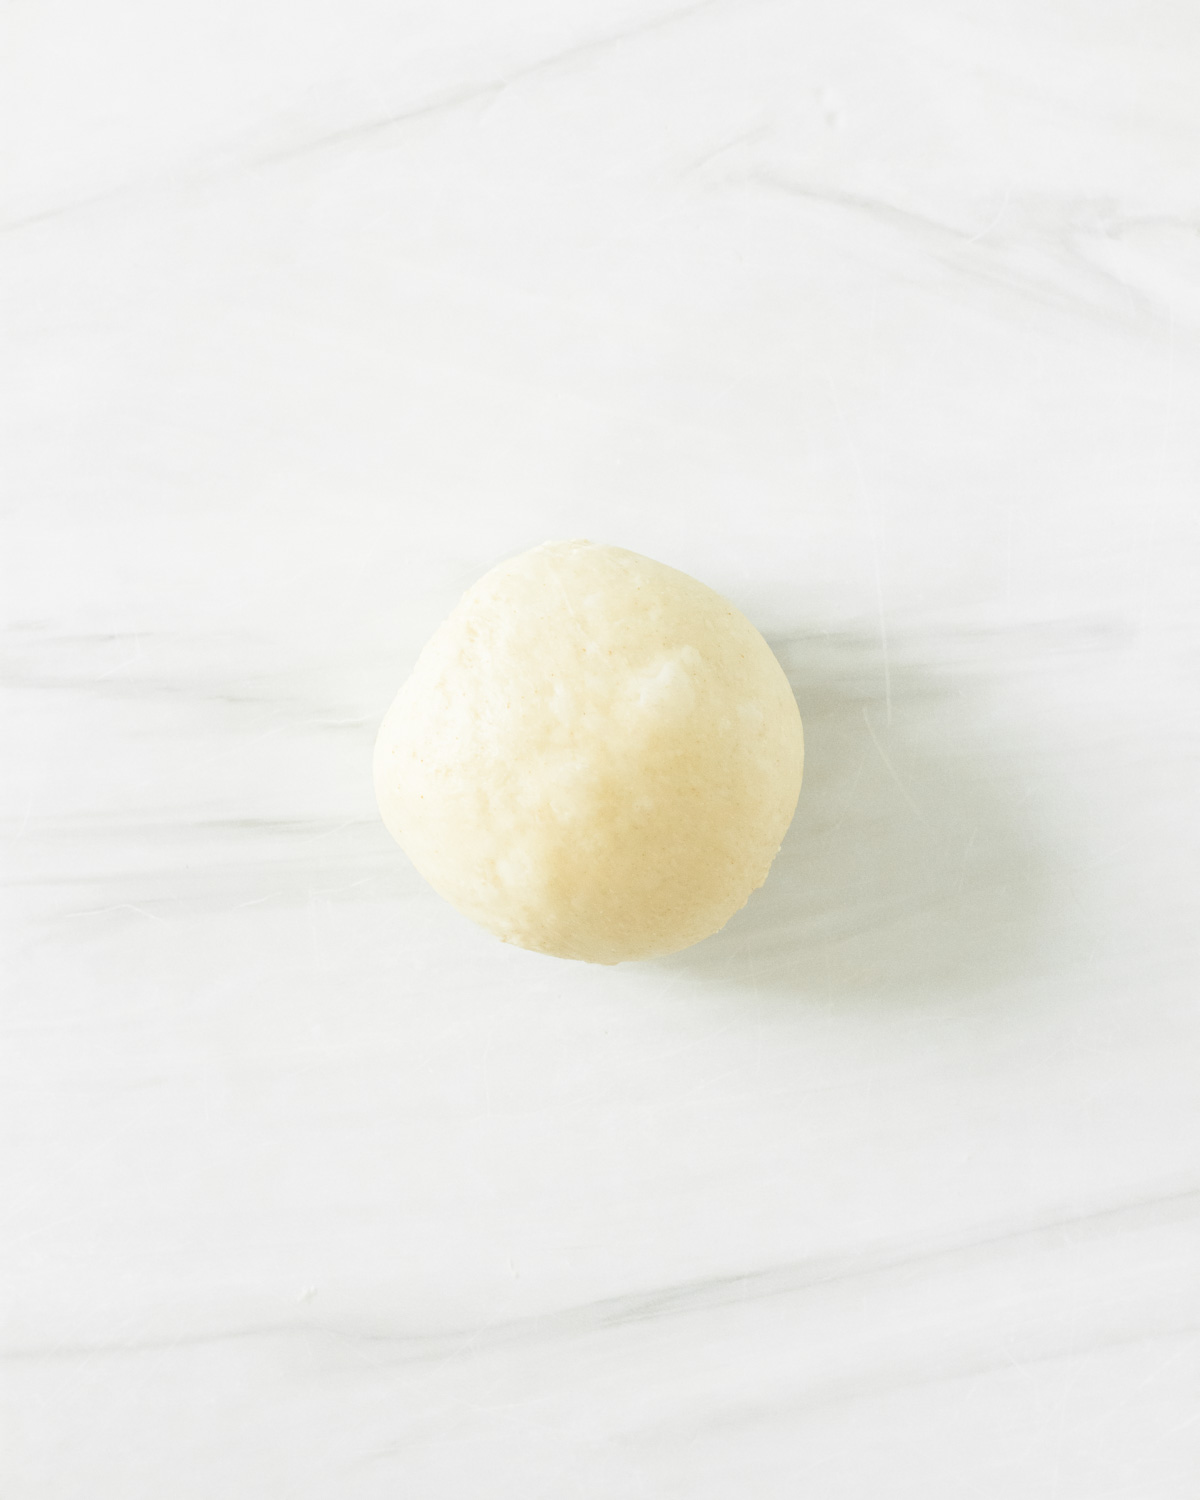 Step 5. Roll the dough up and shape into a ball